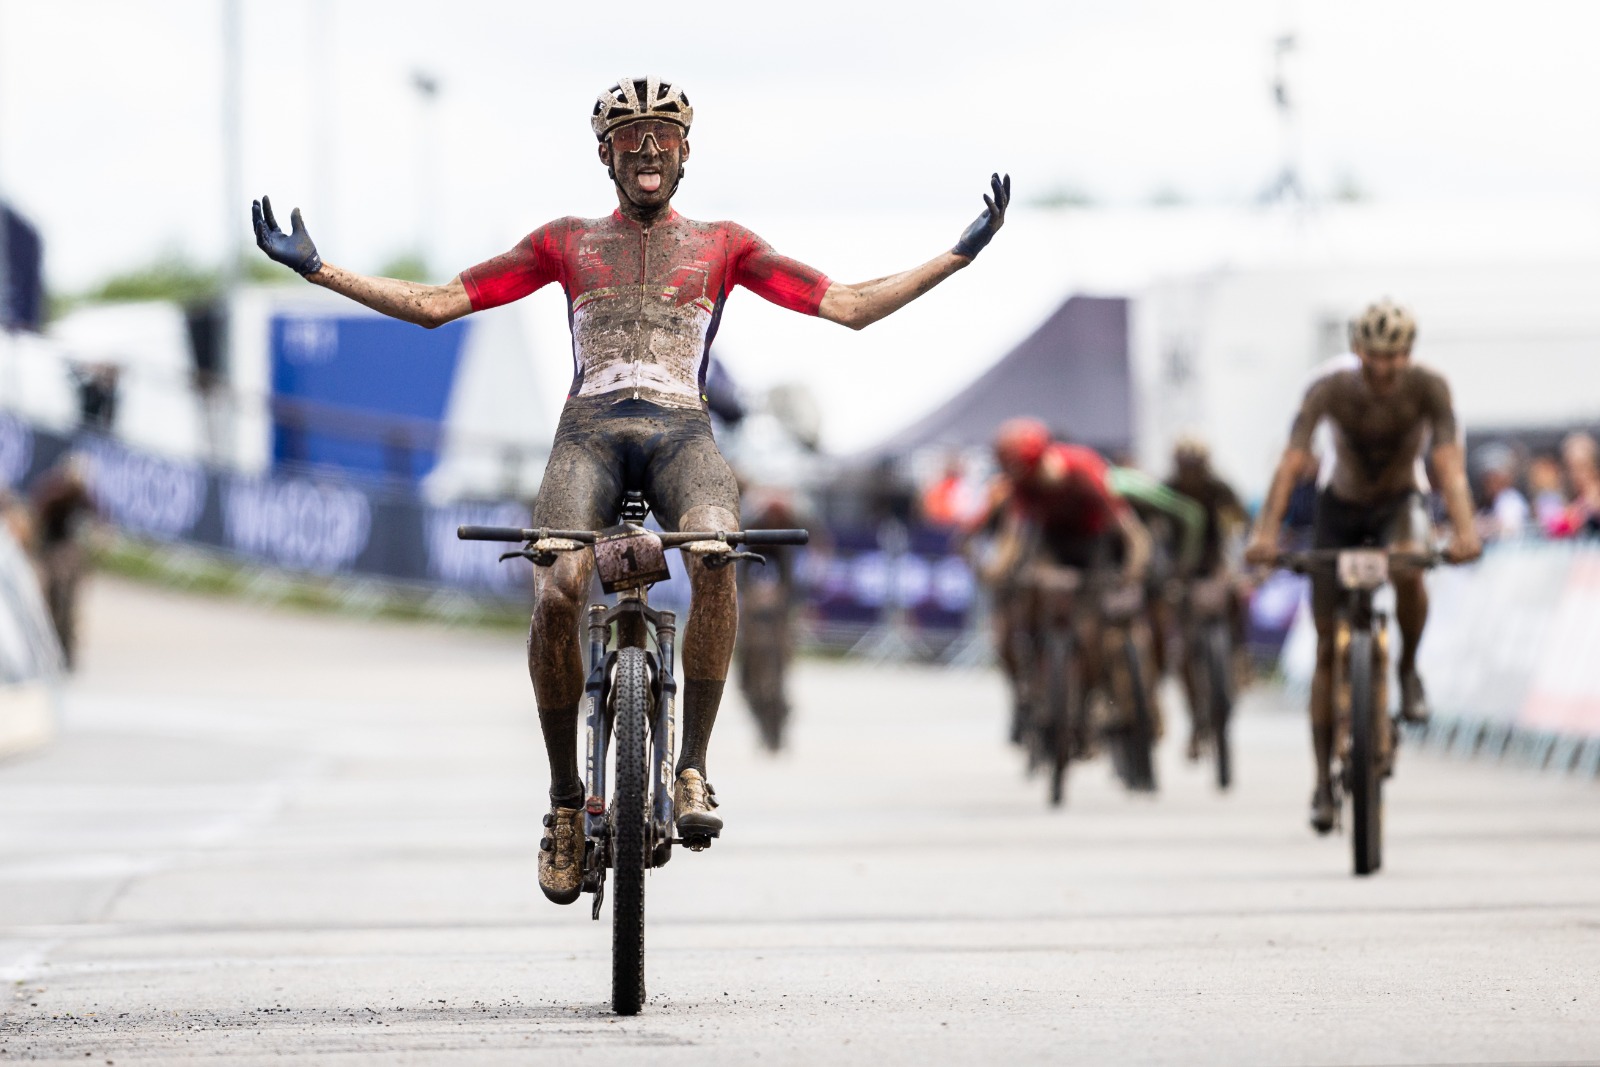 NORTH AMERICAN DOUBLE AS HOLMGREN AND AMOS CLAIM UNDER-23 CROSS-COUNTRY SHORT TRACK WINS IN WILD, WET, WINDSWEPT NOVÉ MĔSTO NA MORAVĔ